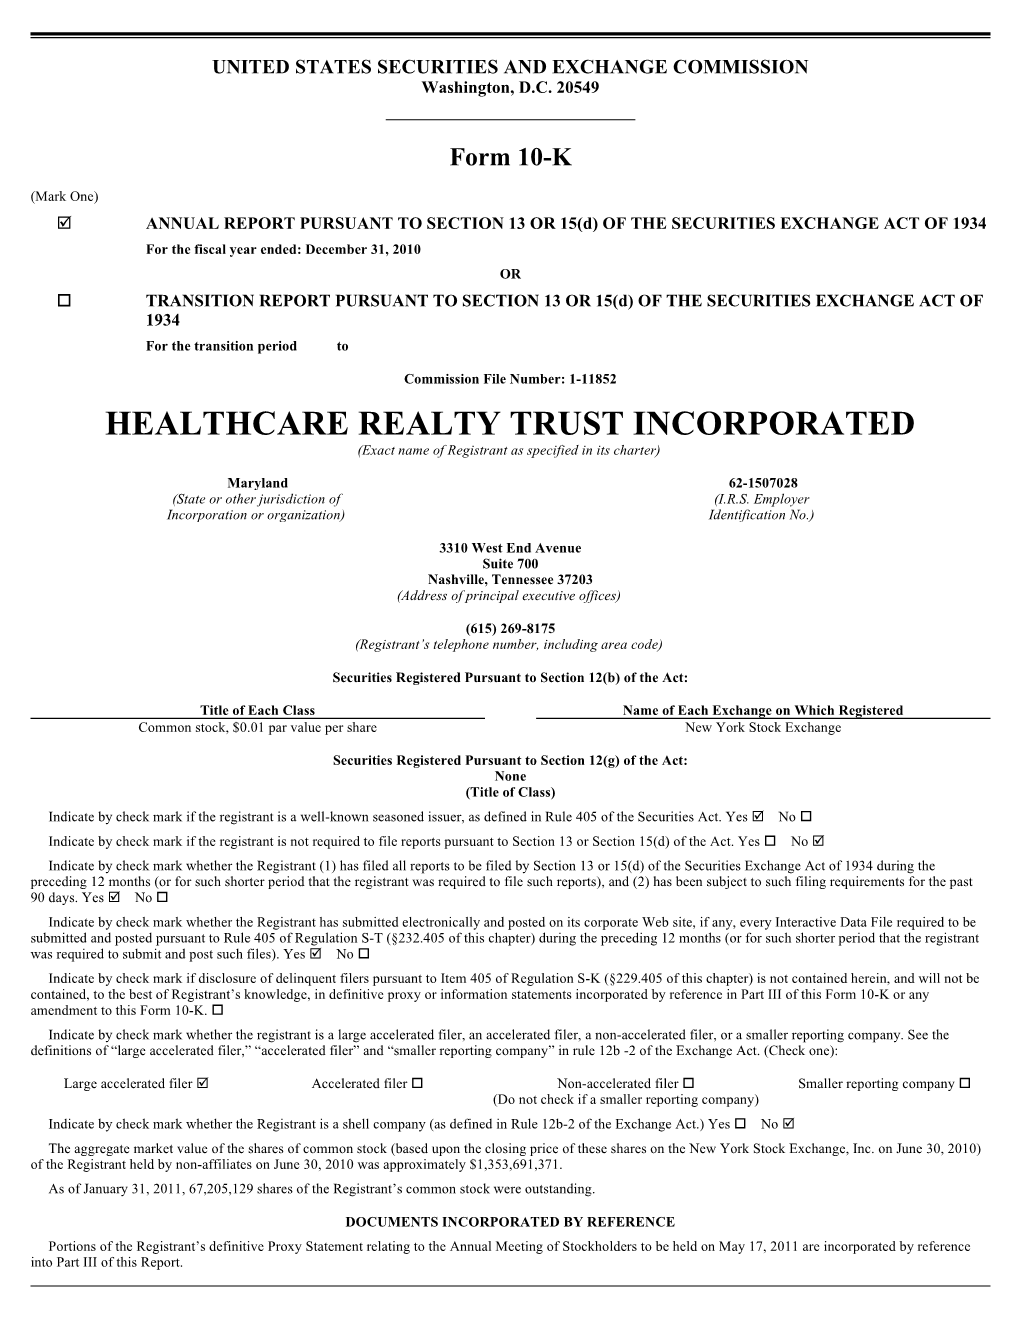 HEALTHCARE REALTY TRUST INCORPORATED (Exact Name of Registrant As Specified in Its Charter)